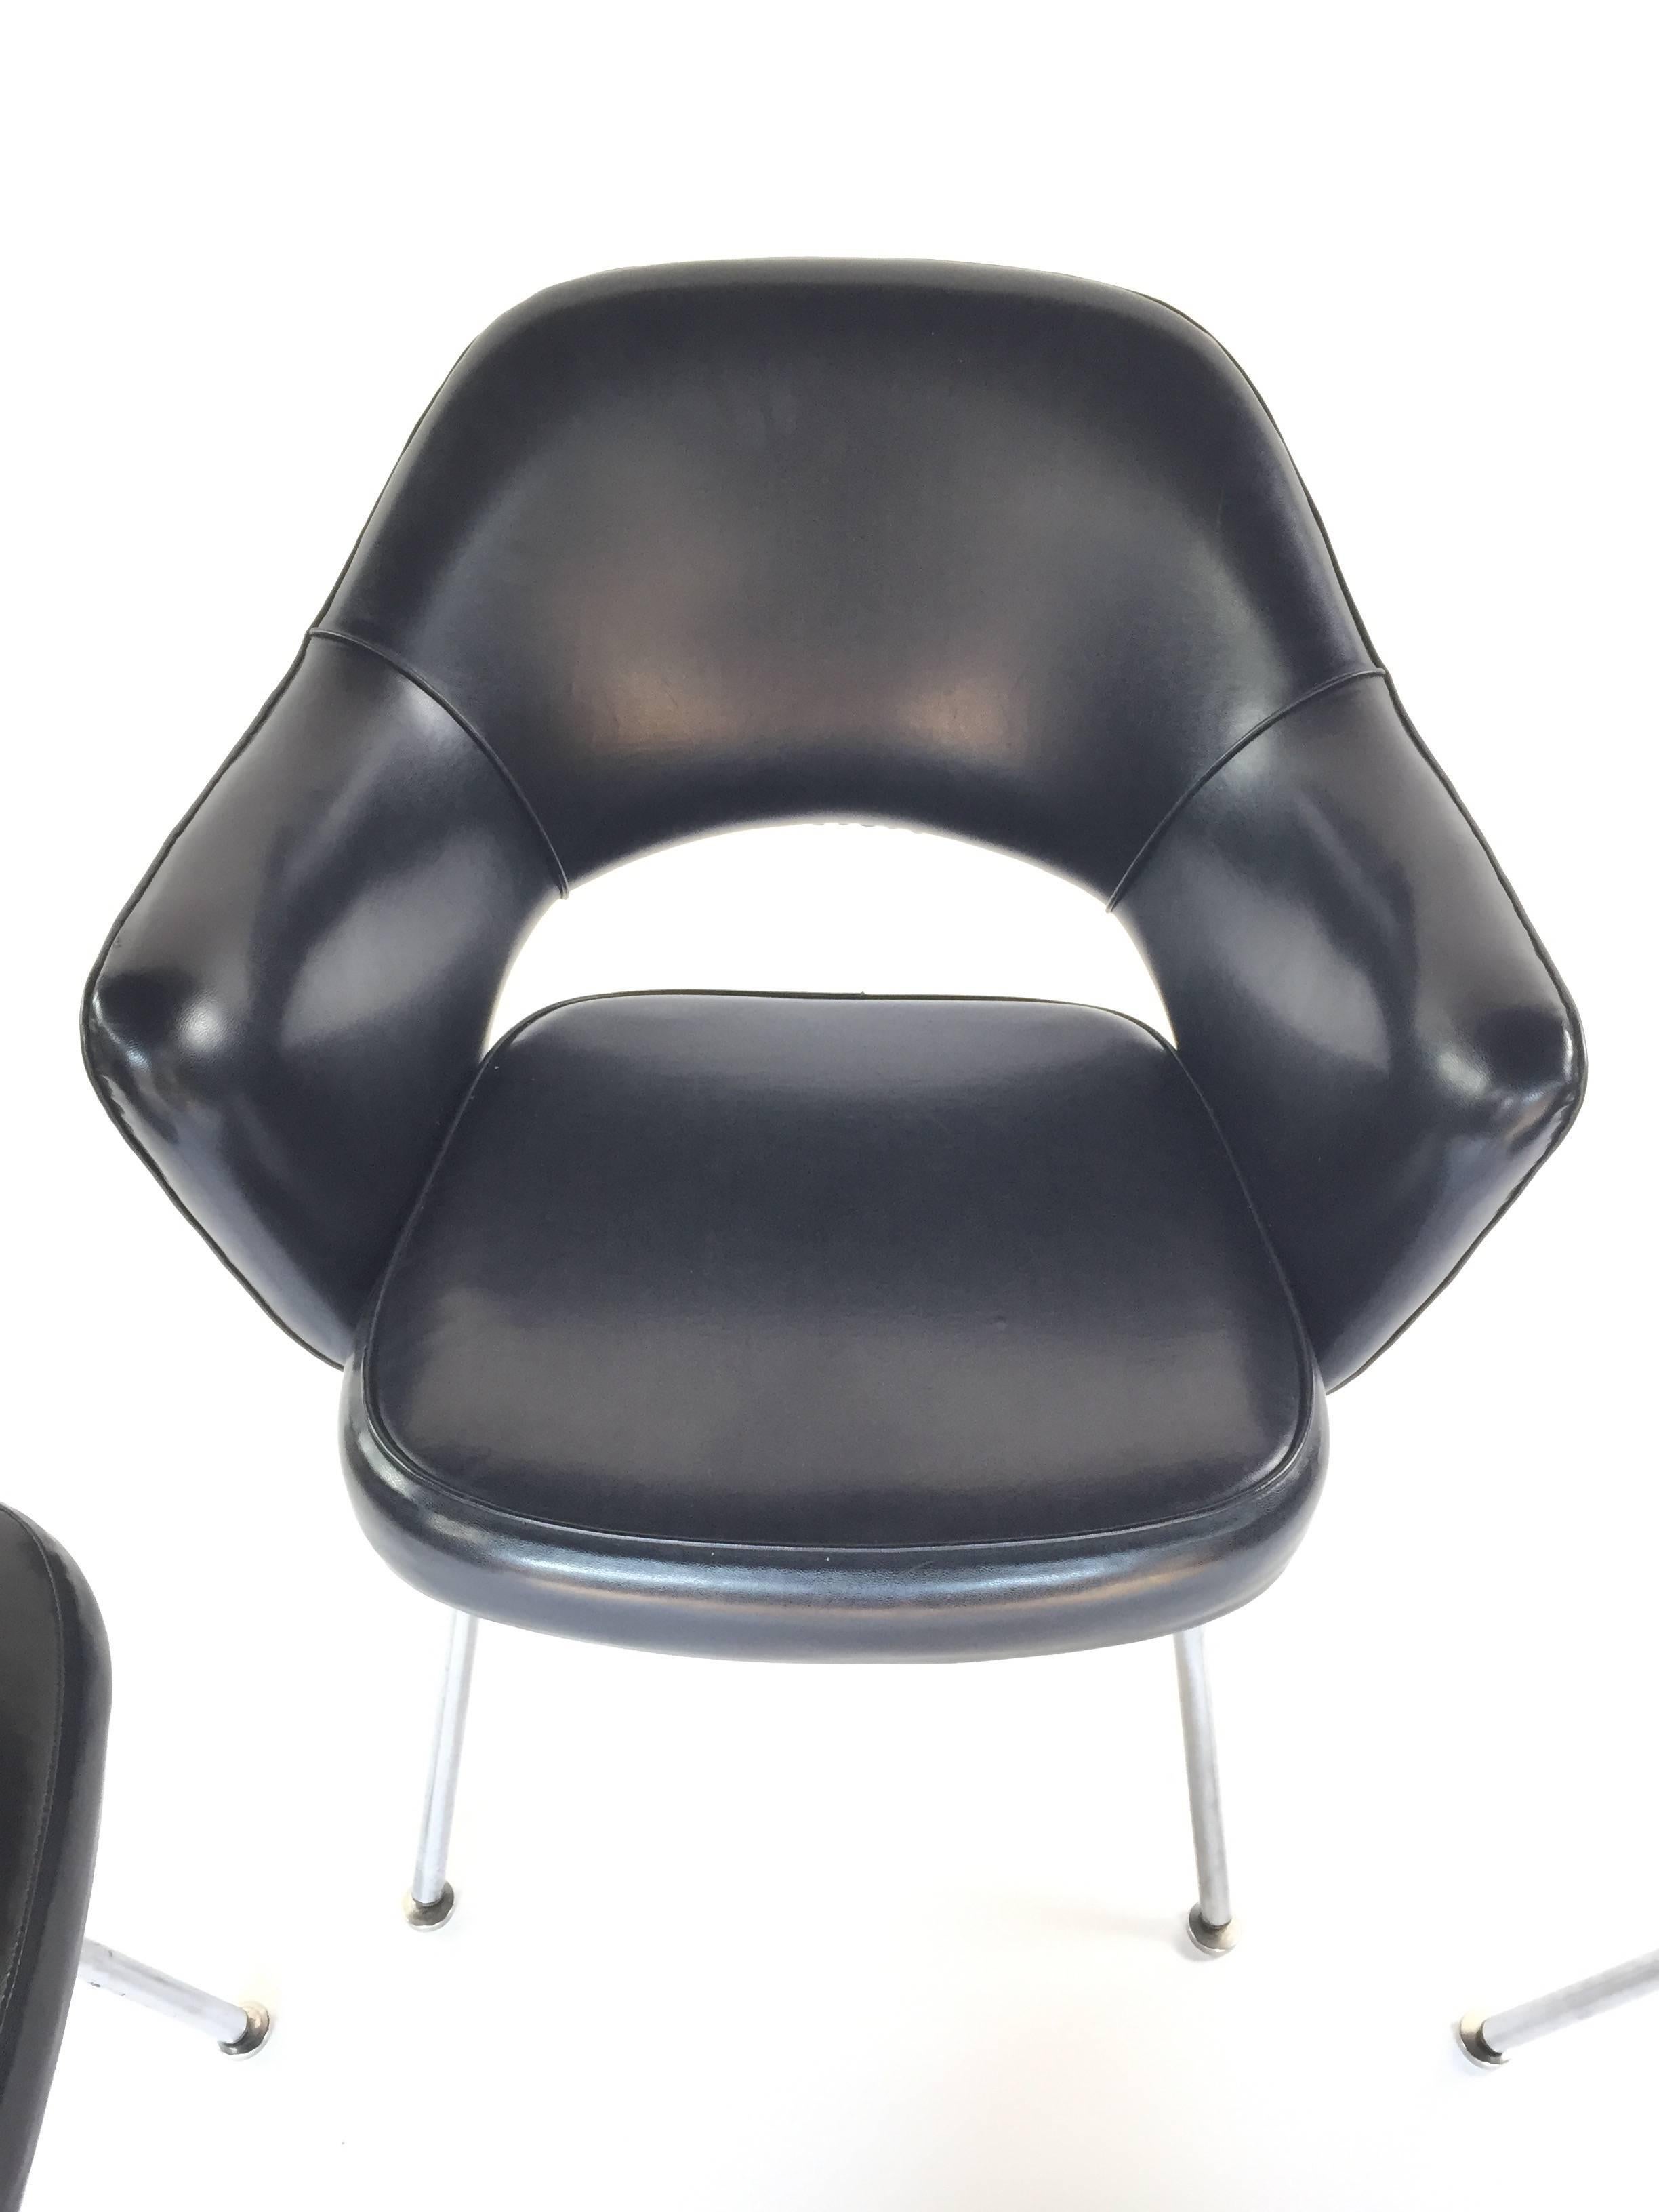 Absolutely pristine original set of four early bow tie label Eero Saarinen Executive Chairs. Perfect steel legs and black vinyl. Supple to the touch and full bodied resilient foam. Two chairs with arms, two side chairs.